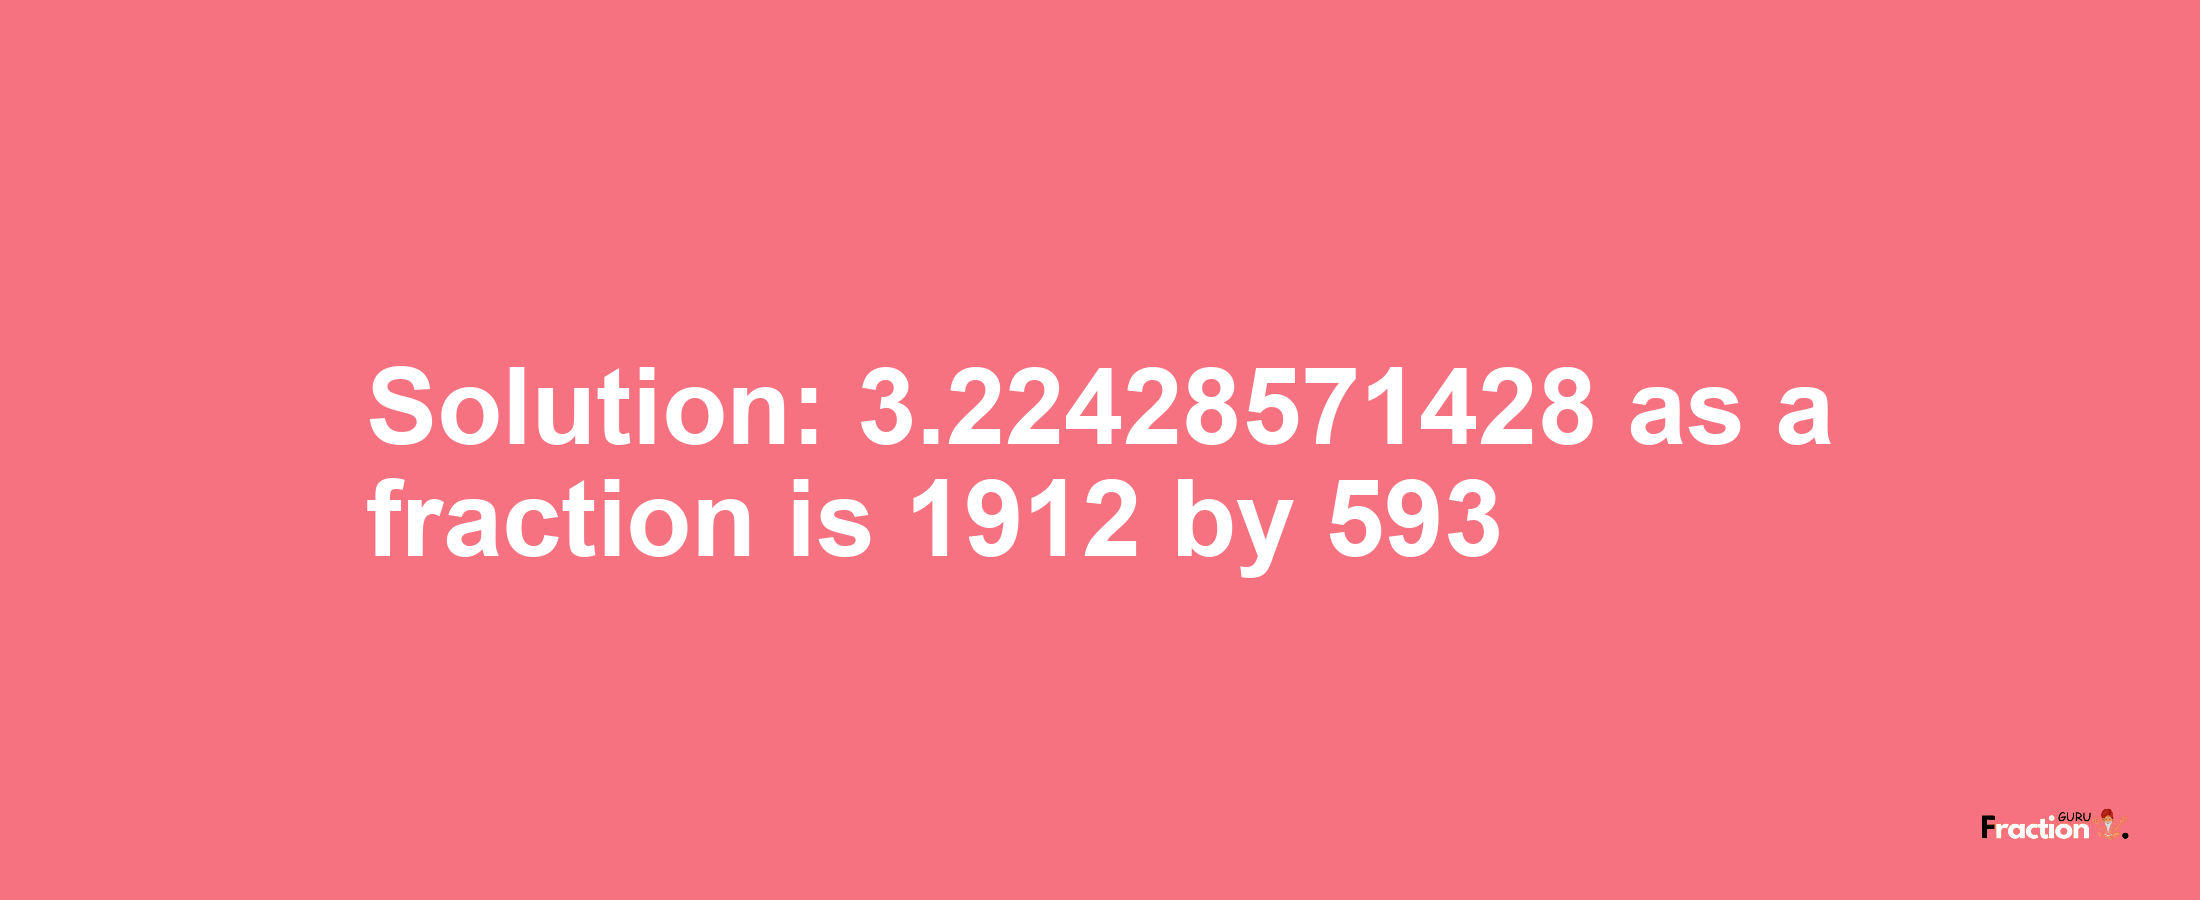 Solution:3.22428571428 as a fraction is 1912/593